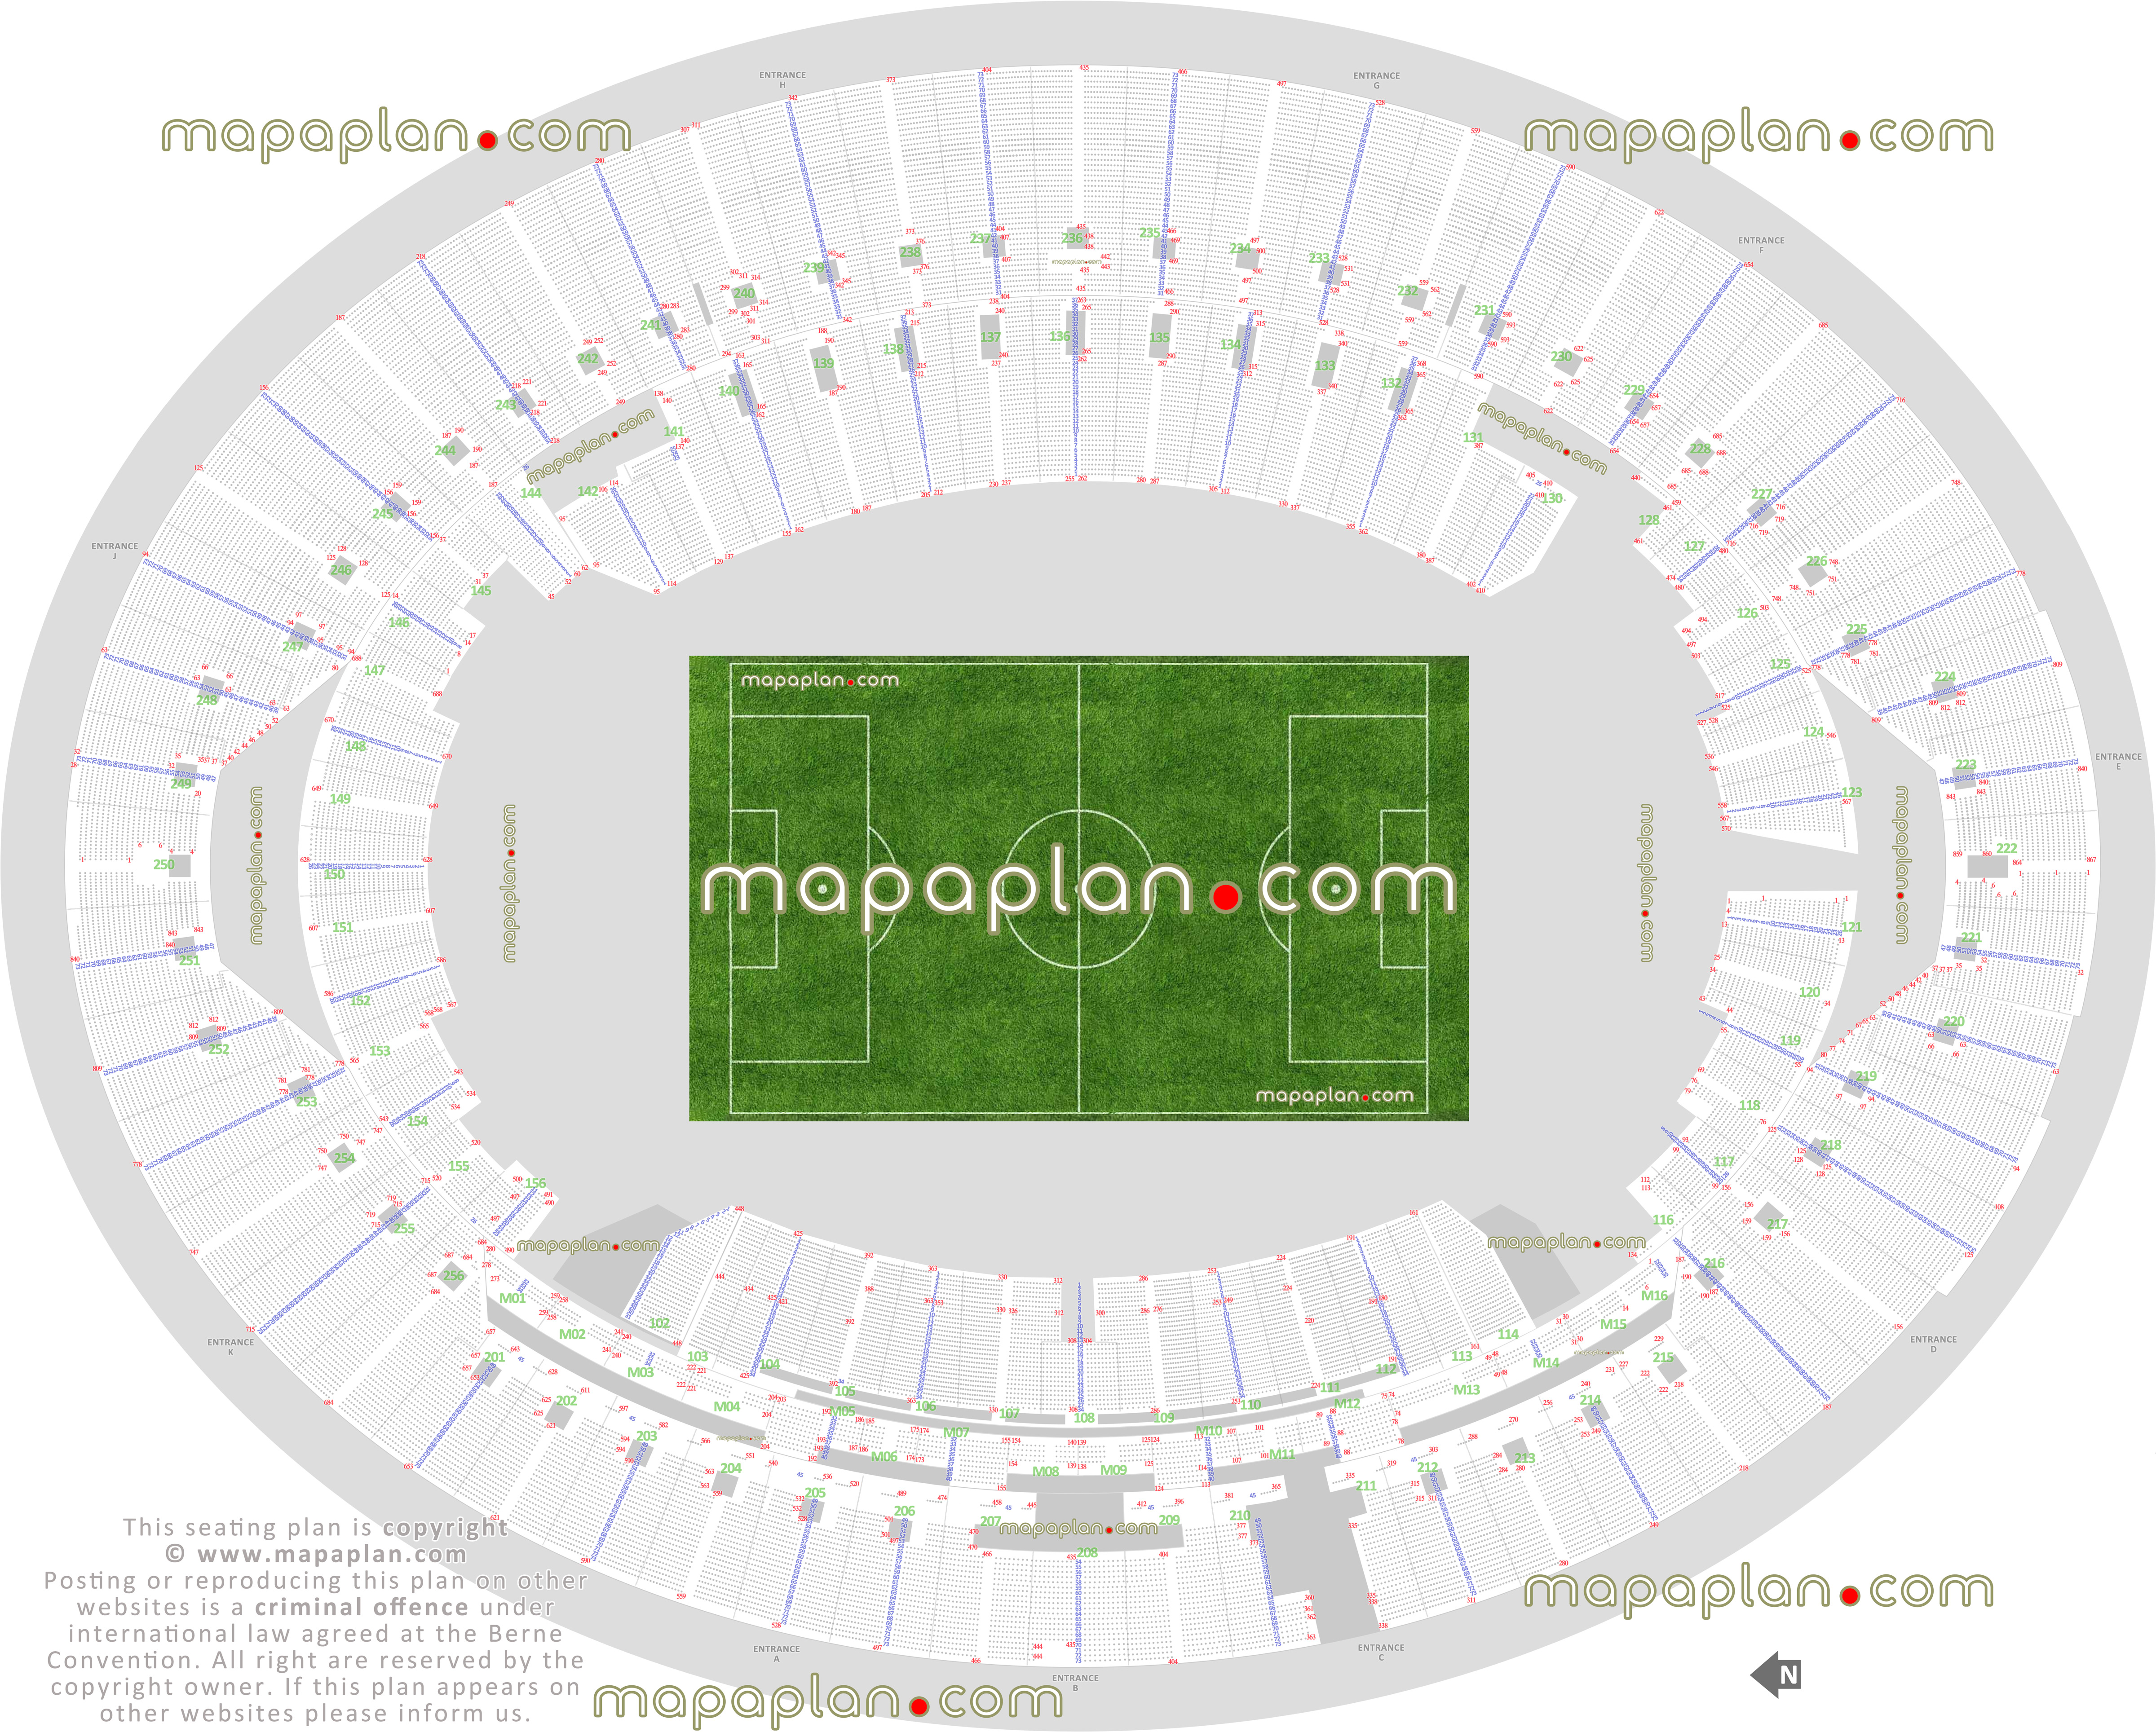 London Stadium (West Ham United Olympic Park) seating plan detailed seat numbers row numbering football plan blocks chart layout